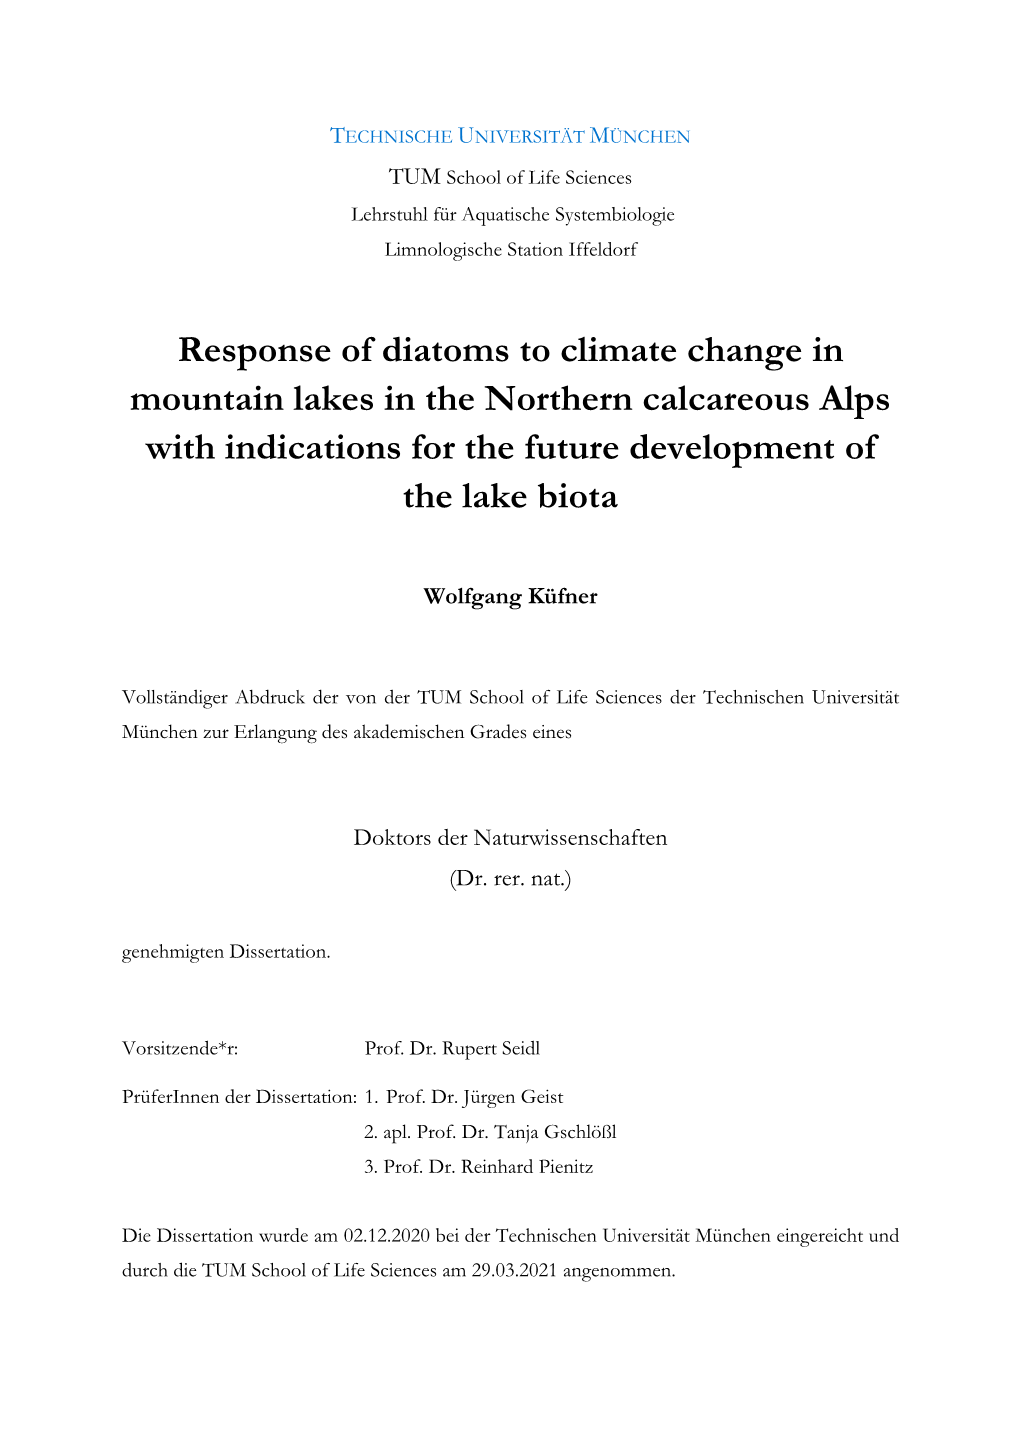 Response of Diatoms to Climate Change in Mountain Lakes in the Northern Calcareous Alps with Indications for the Future Development of the Lake Biota